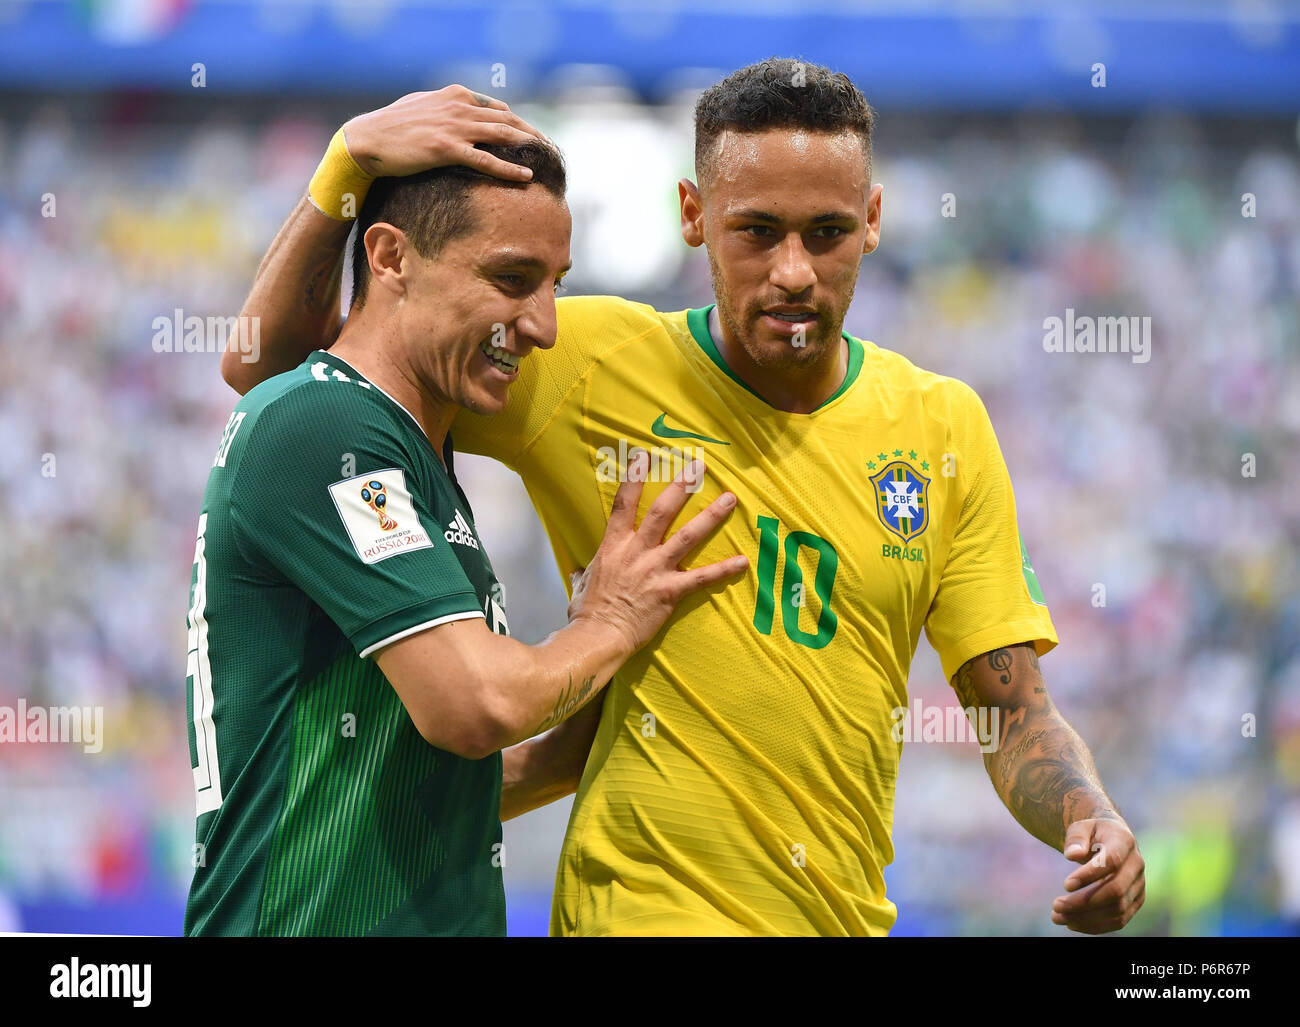 Samara, Russia. 2nd July, 2018. Neymar (R) of Brazil and Andres Guardado of Mexico are seen during the 2018 FIFA World Cup round of 16 match between Brazil and Mexico in Samara, Russia, July 2, 2018. Brazil won 2-0 and advanced to the quarter-final. Credit: Li Ga/Xinhua/Alamy Live News Stock Photo